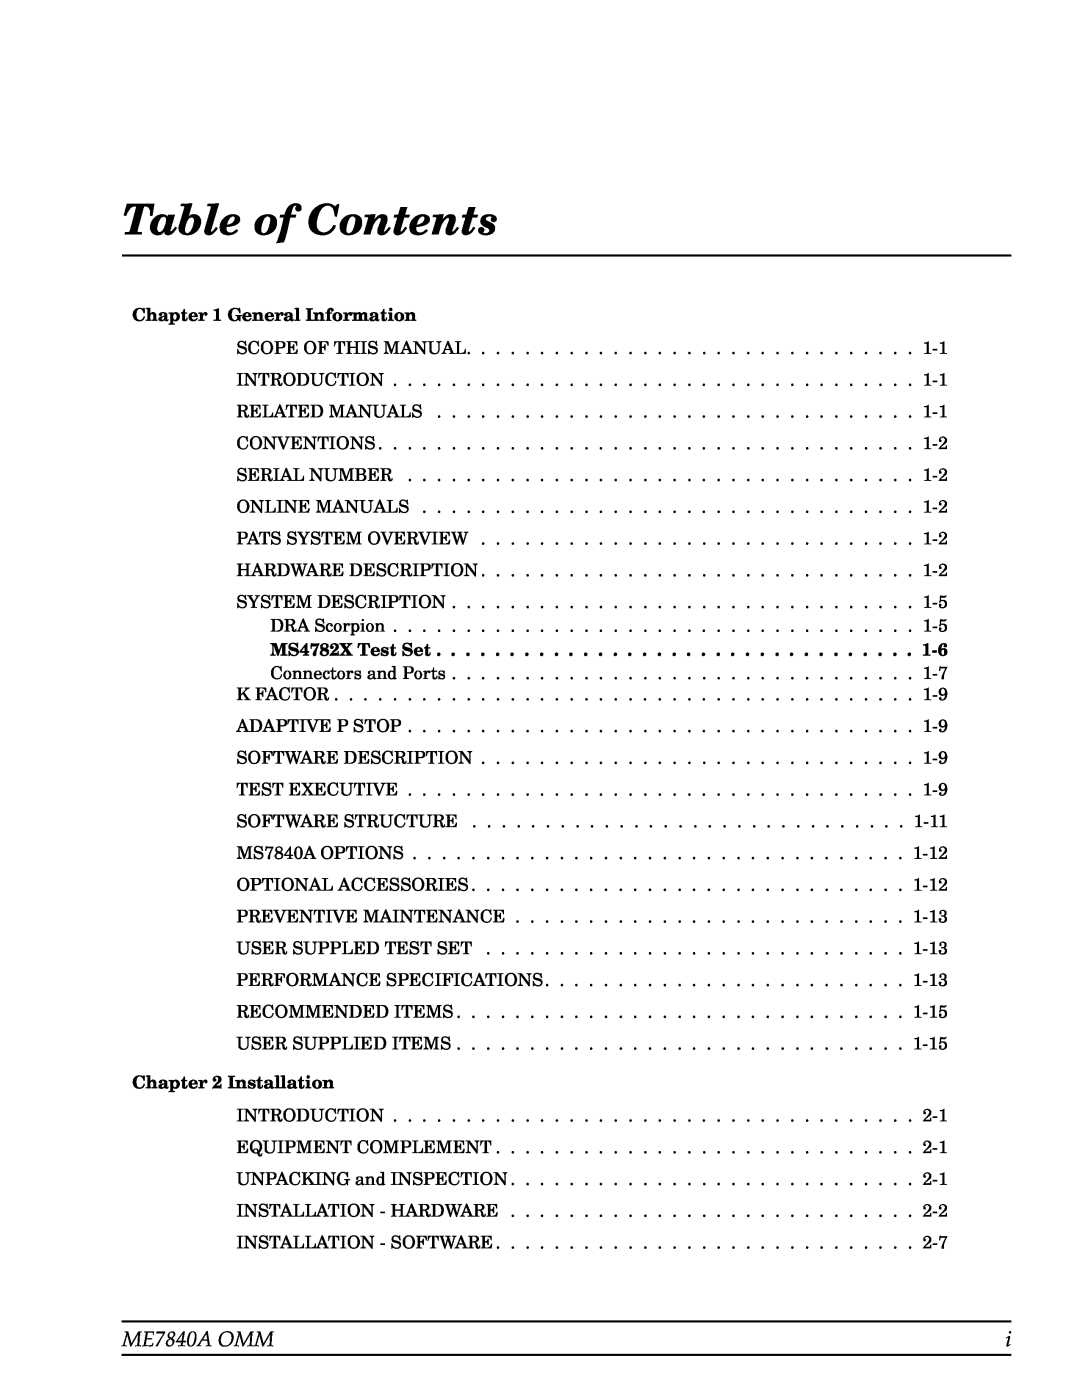 Anritsu manual Table of Contents, ME7840A OMM, General Information, Installation 